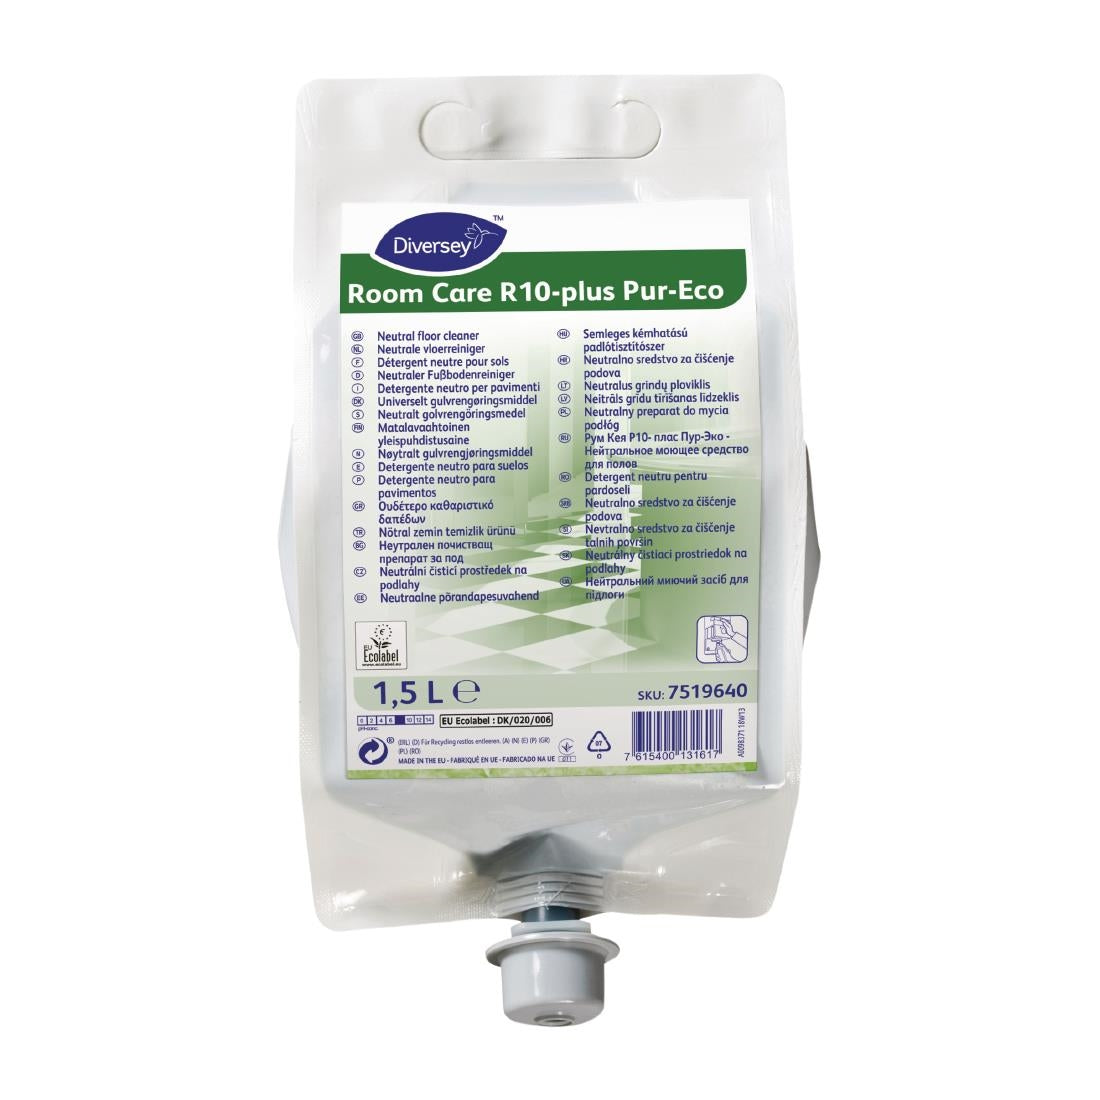 CX815 Room Care R10-plus Pur-Eco Neutral Floor Cleaner Concentrate 1.5Ltr JD Catering Equipment Solutions Ltd